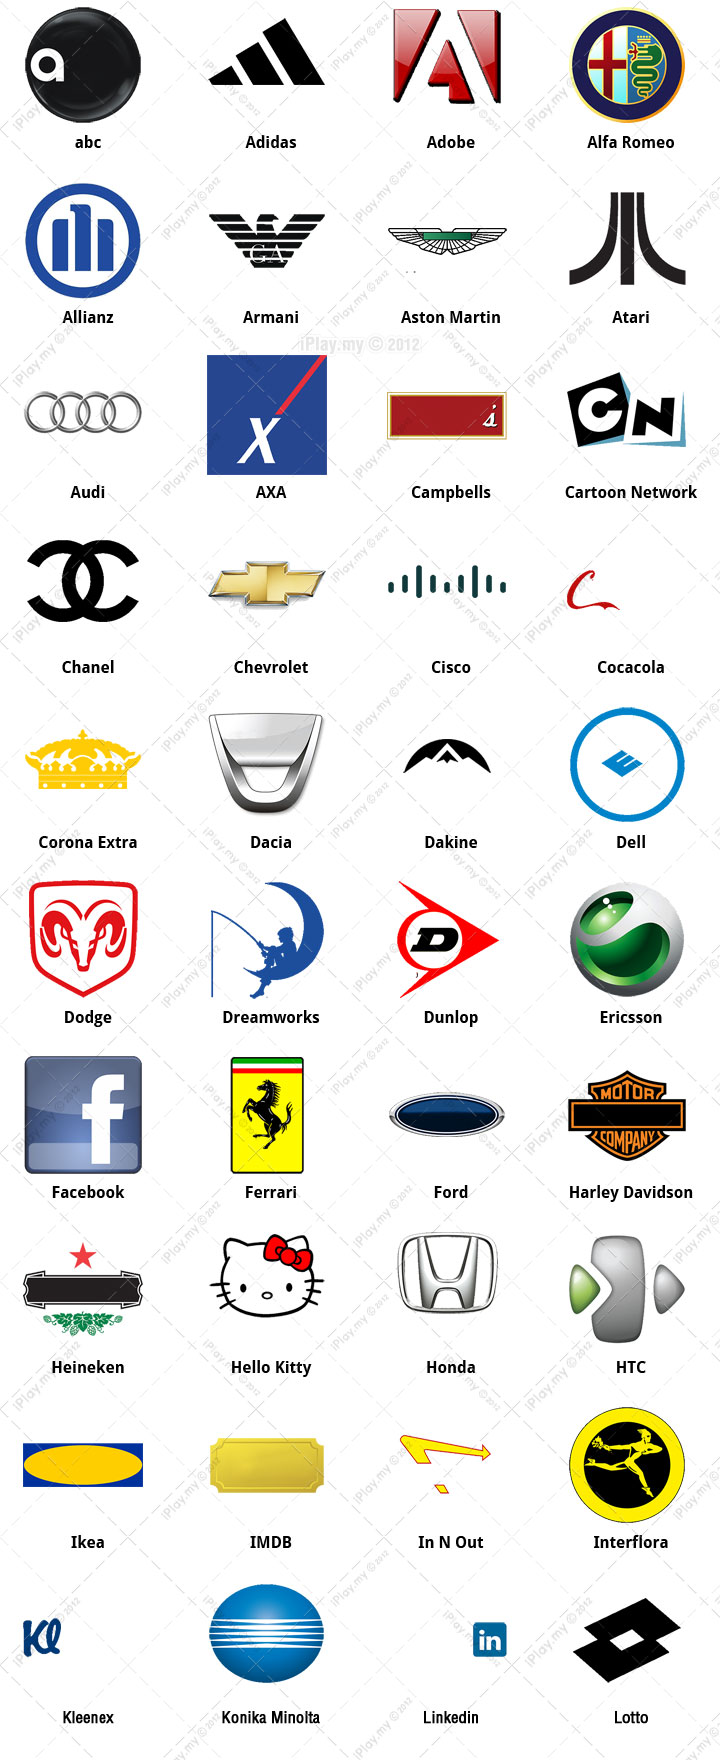 logo quiz answers level 2 android app